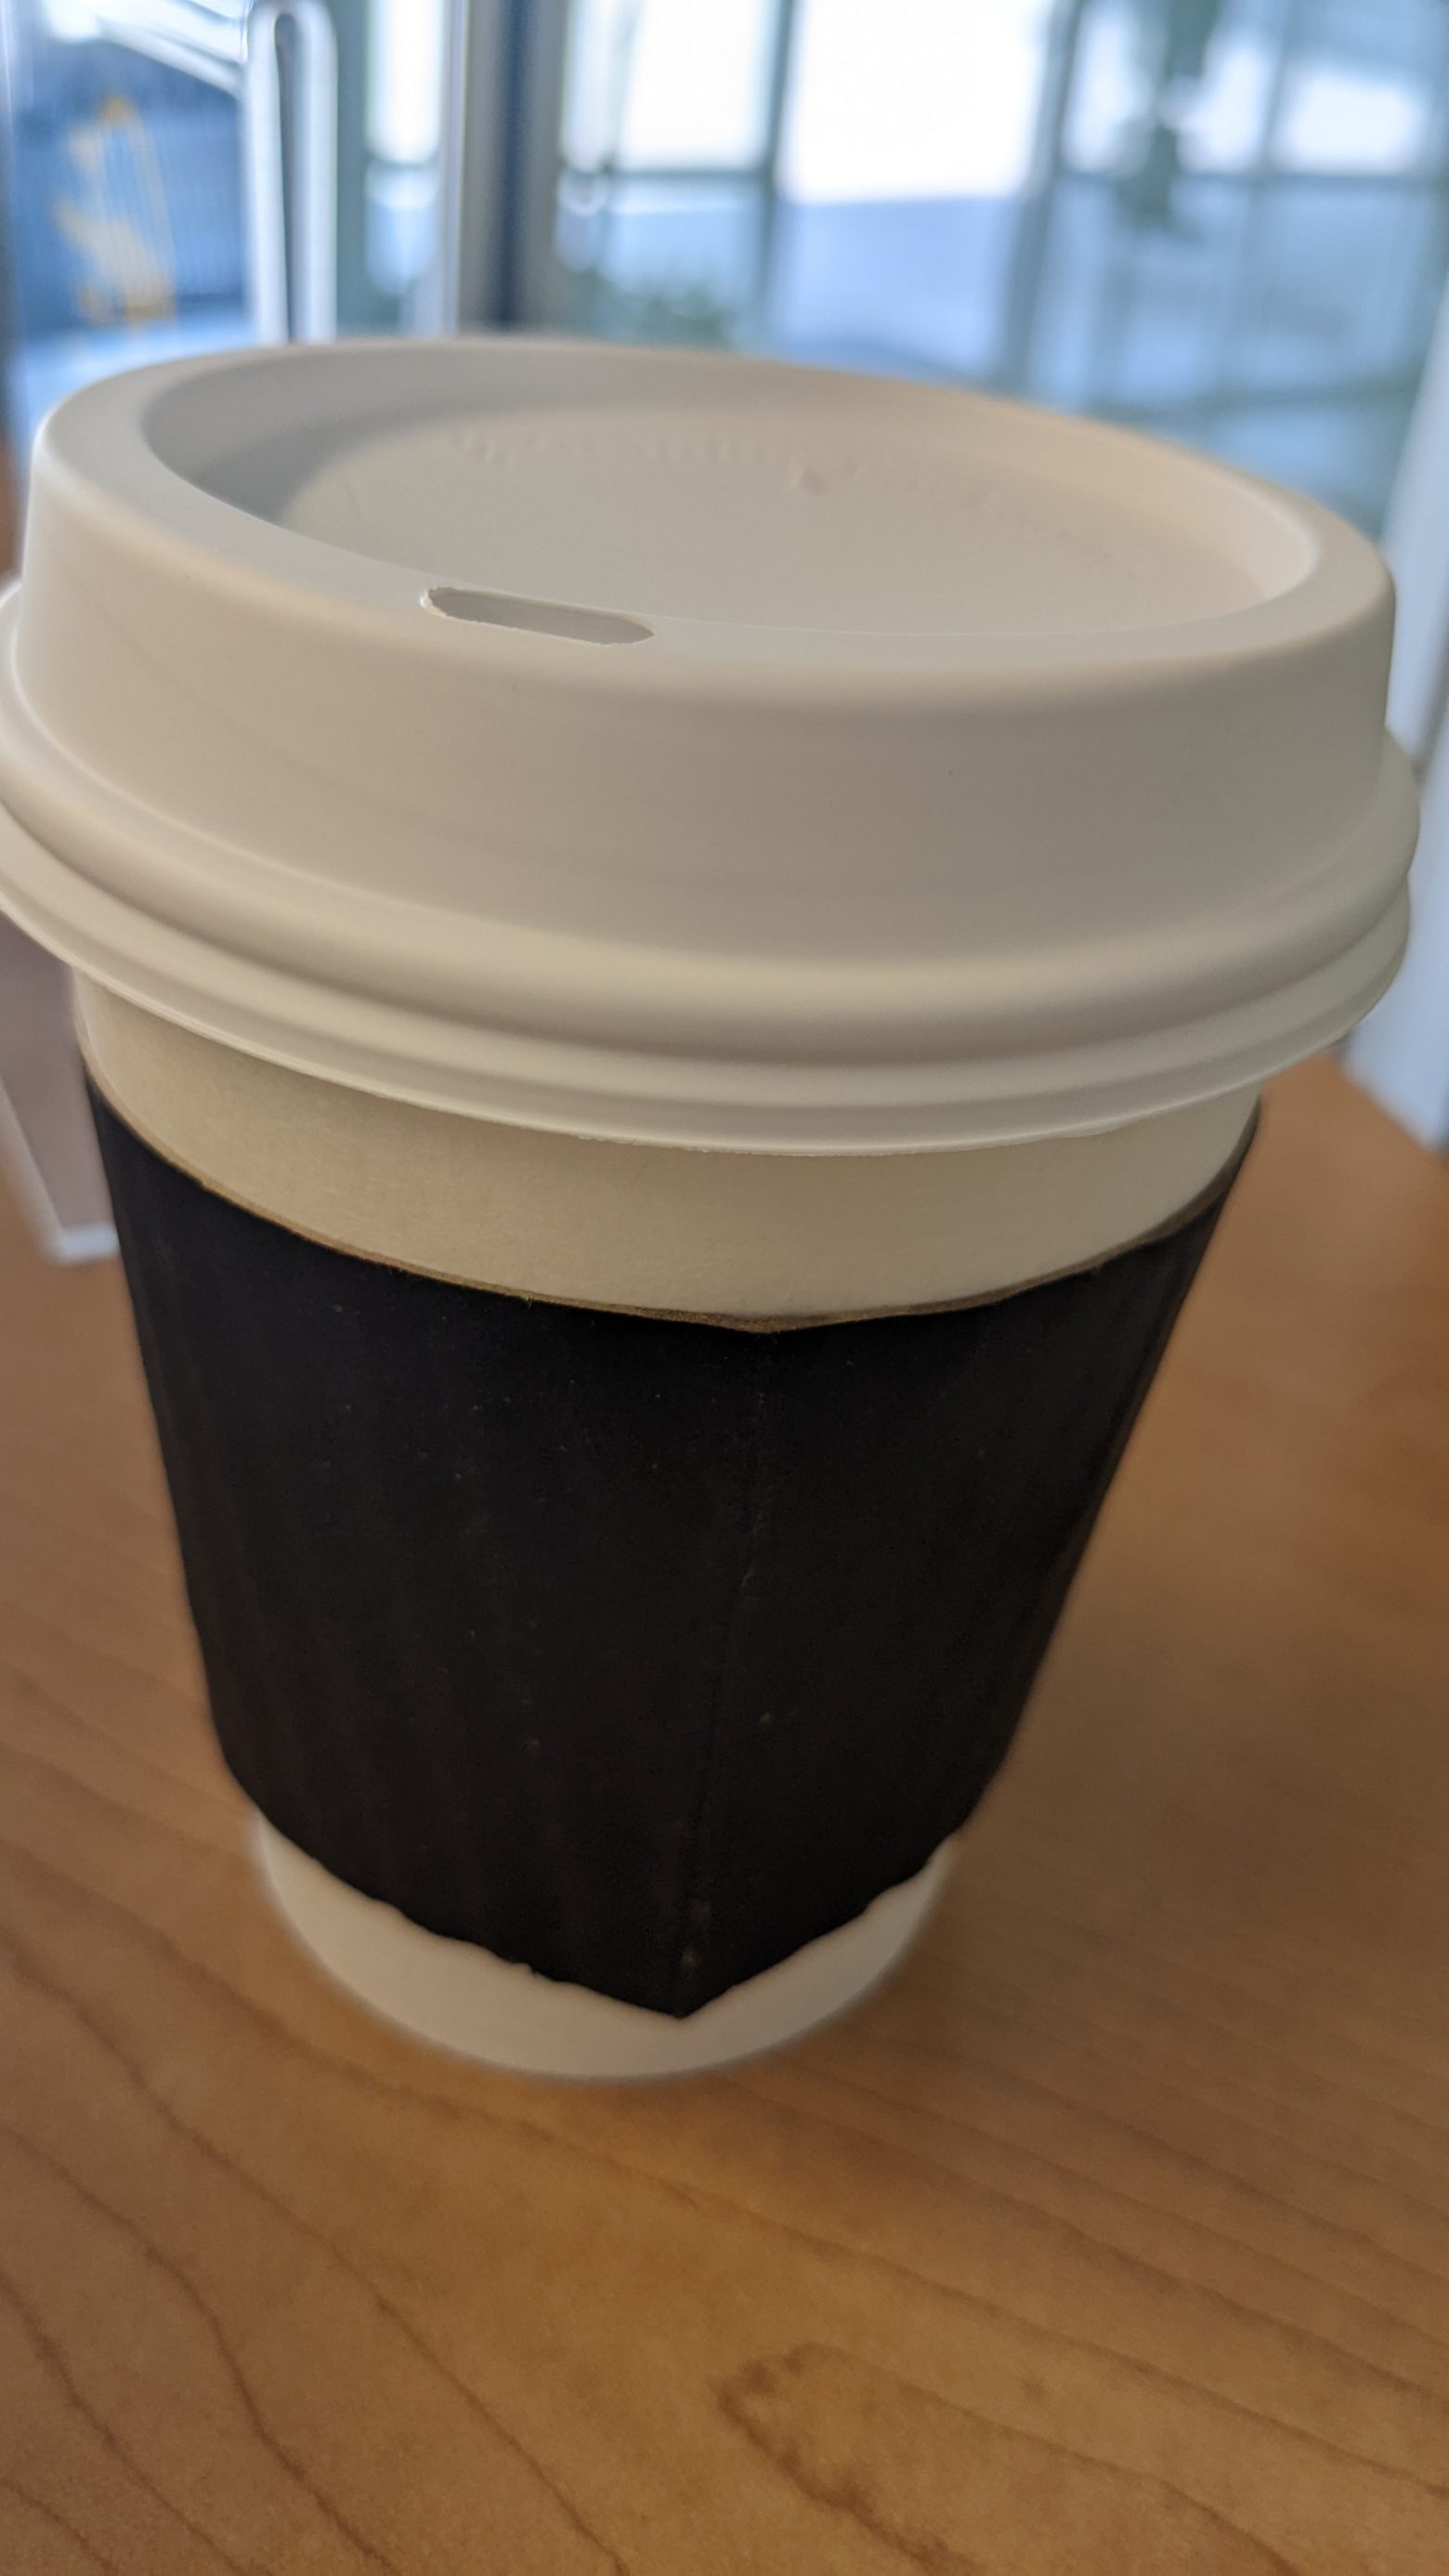 We’re not perfect: My Single-use Coffee Cup